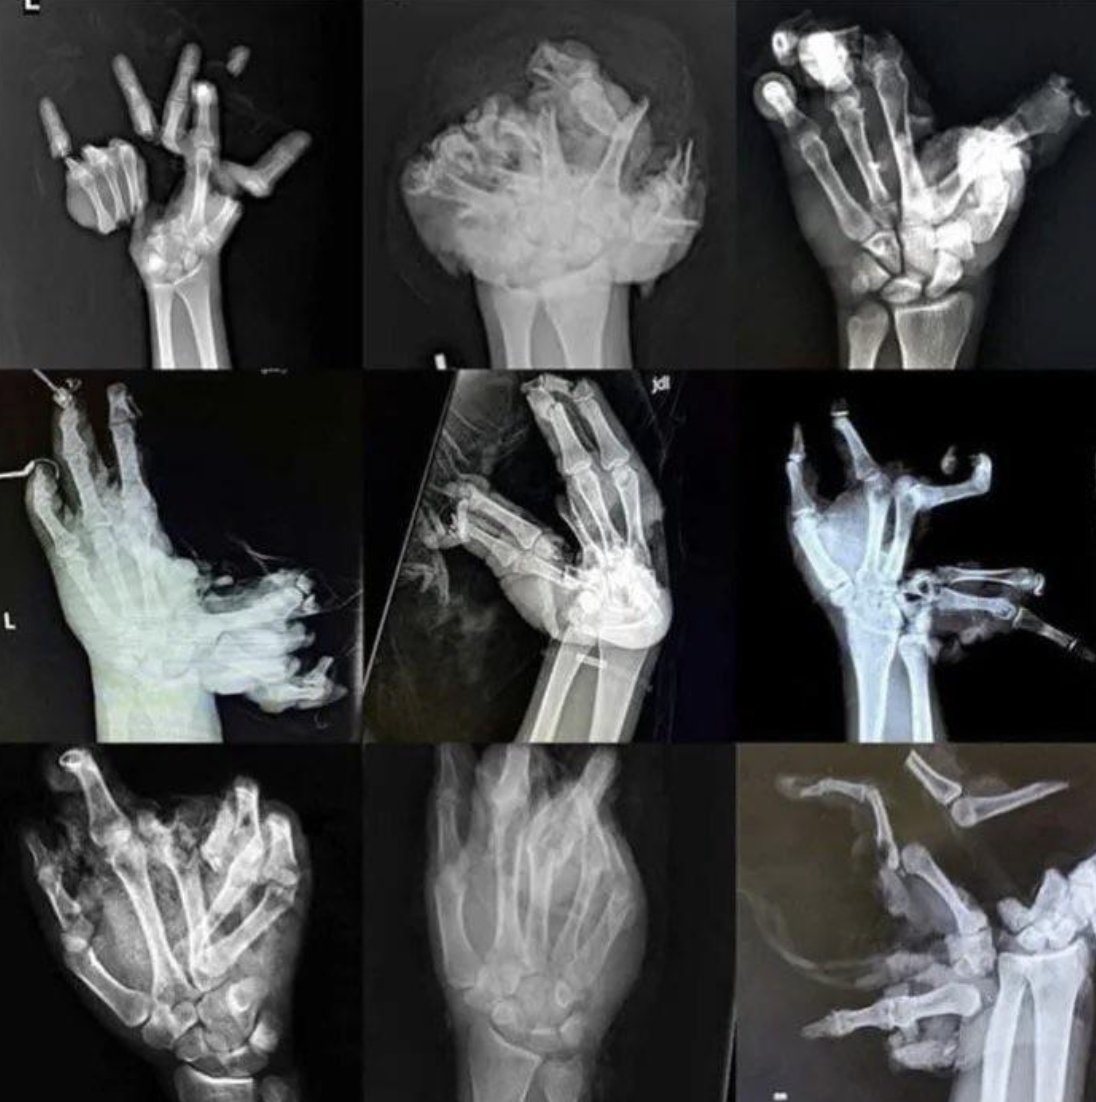 Multiple x-rays of hands